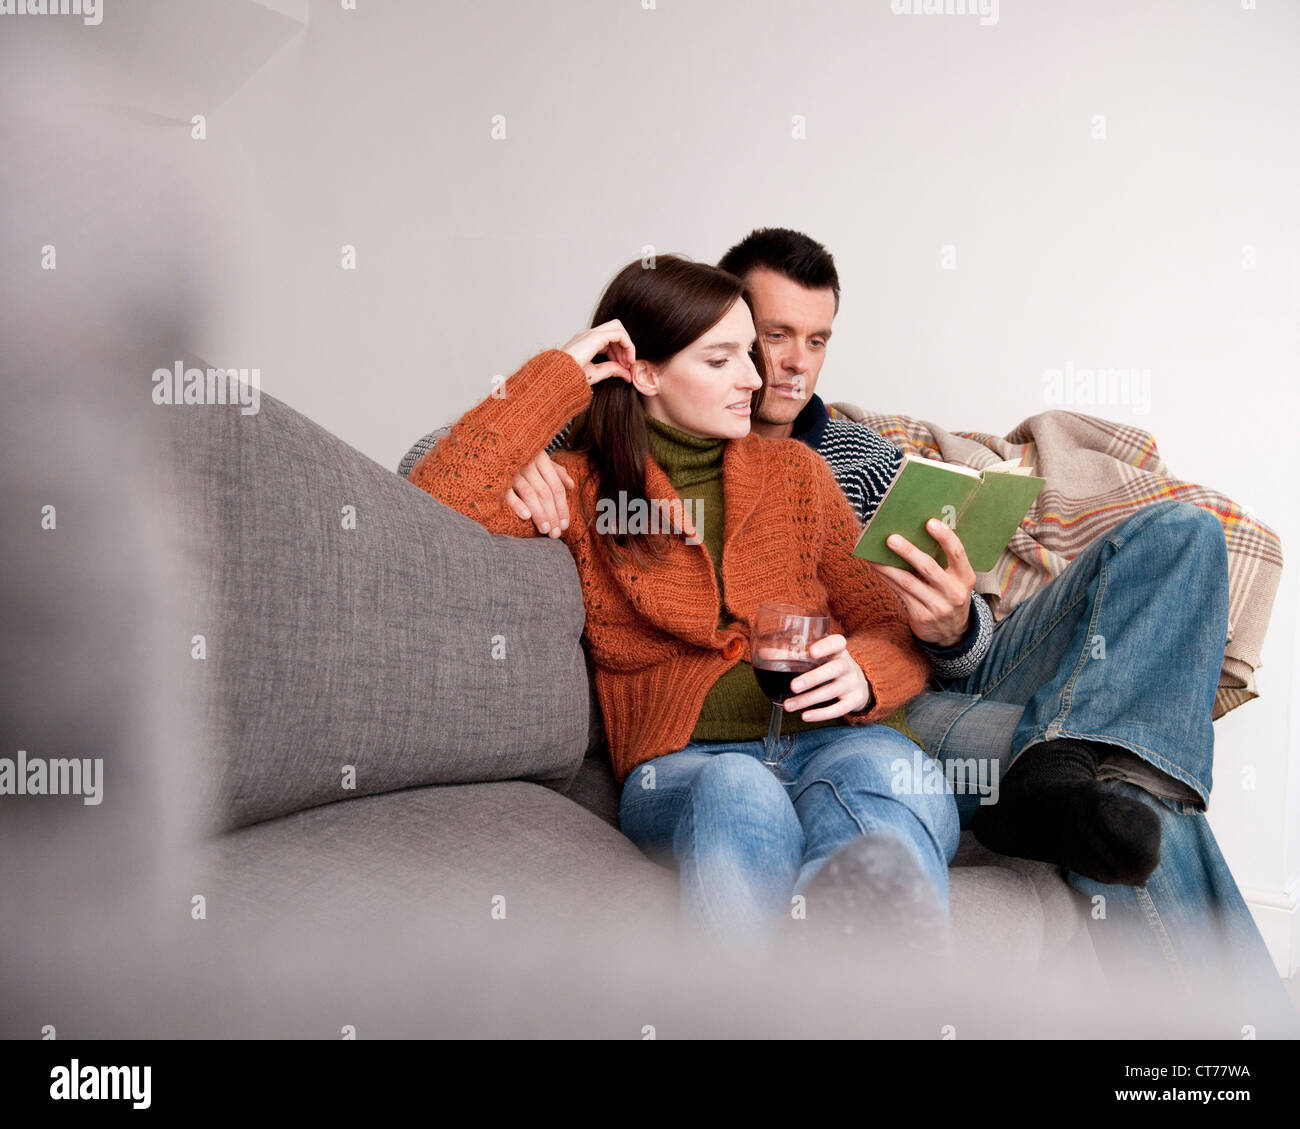 Young couple sitting on sofa reading book Banque D'Images